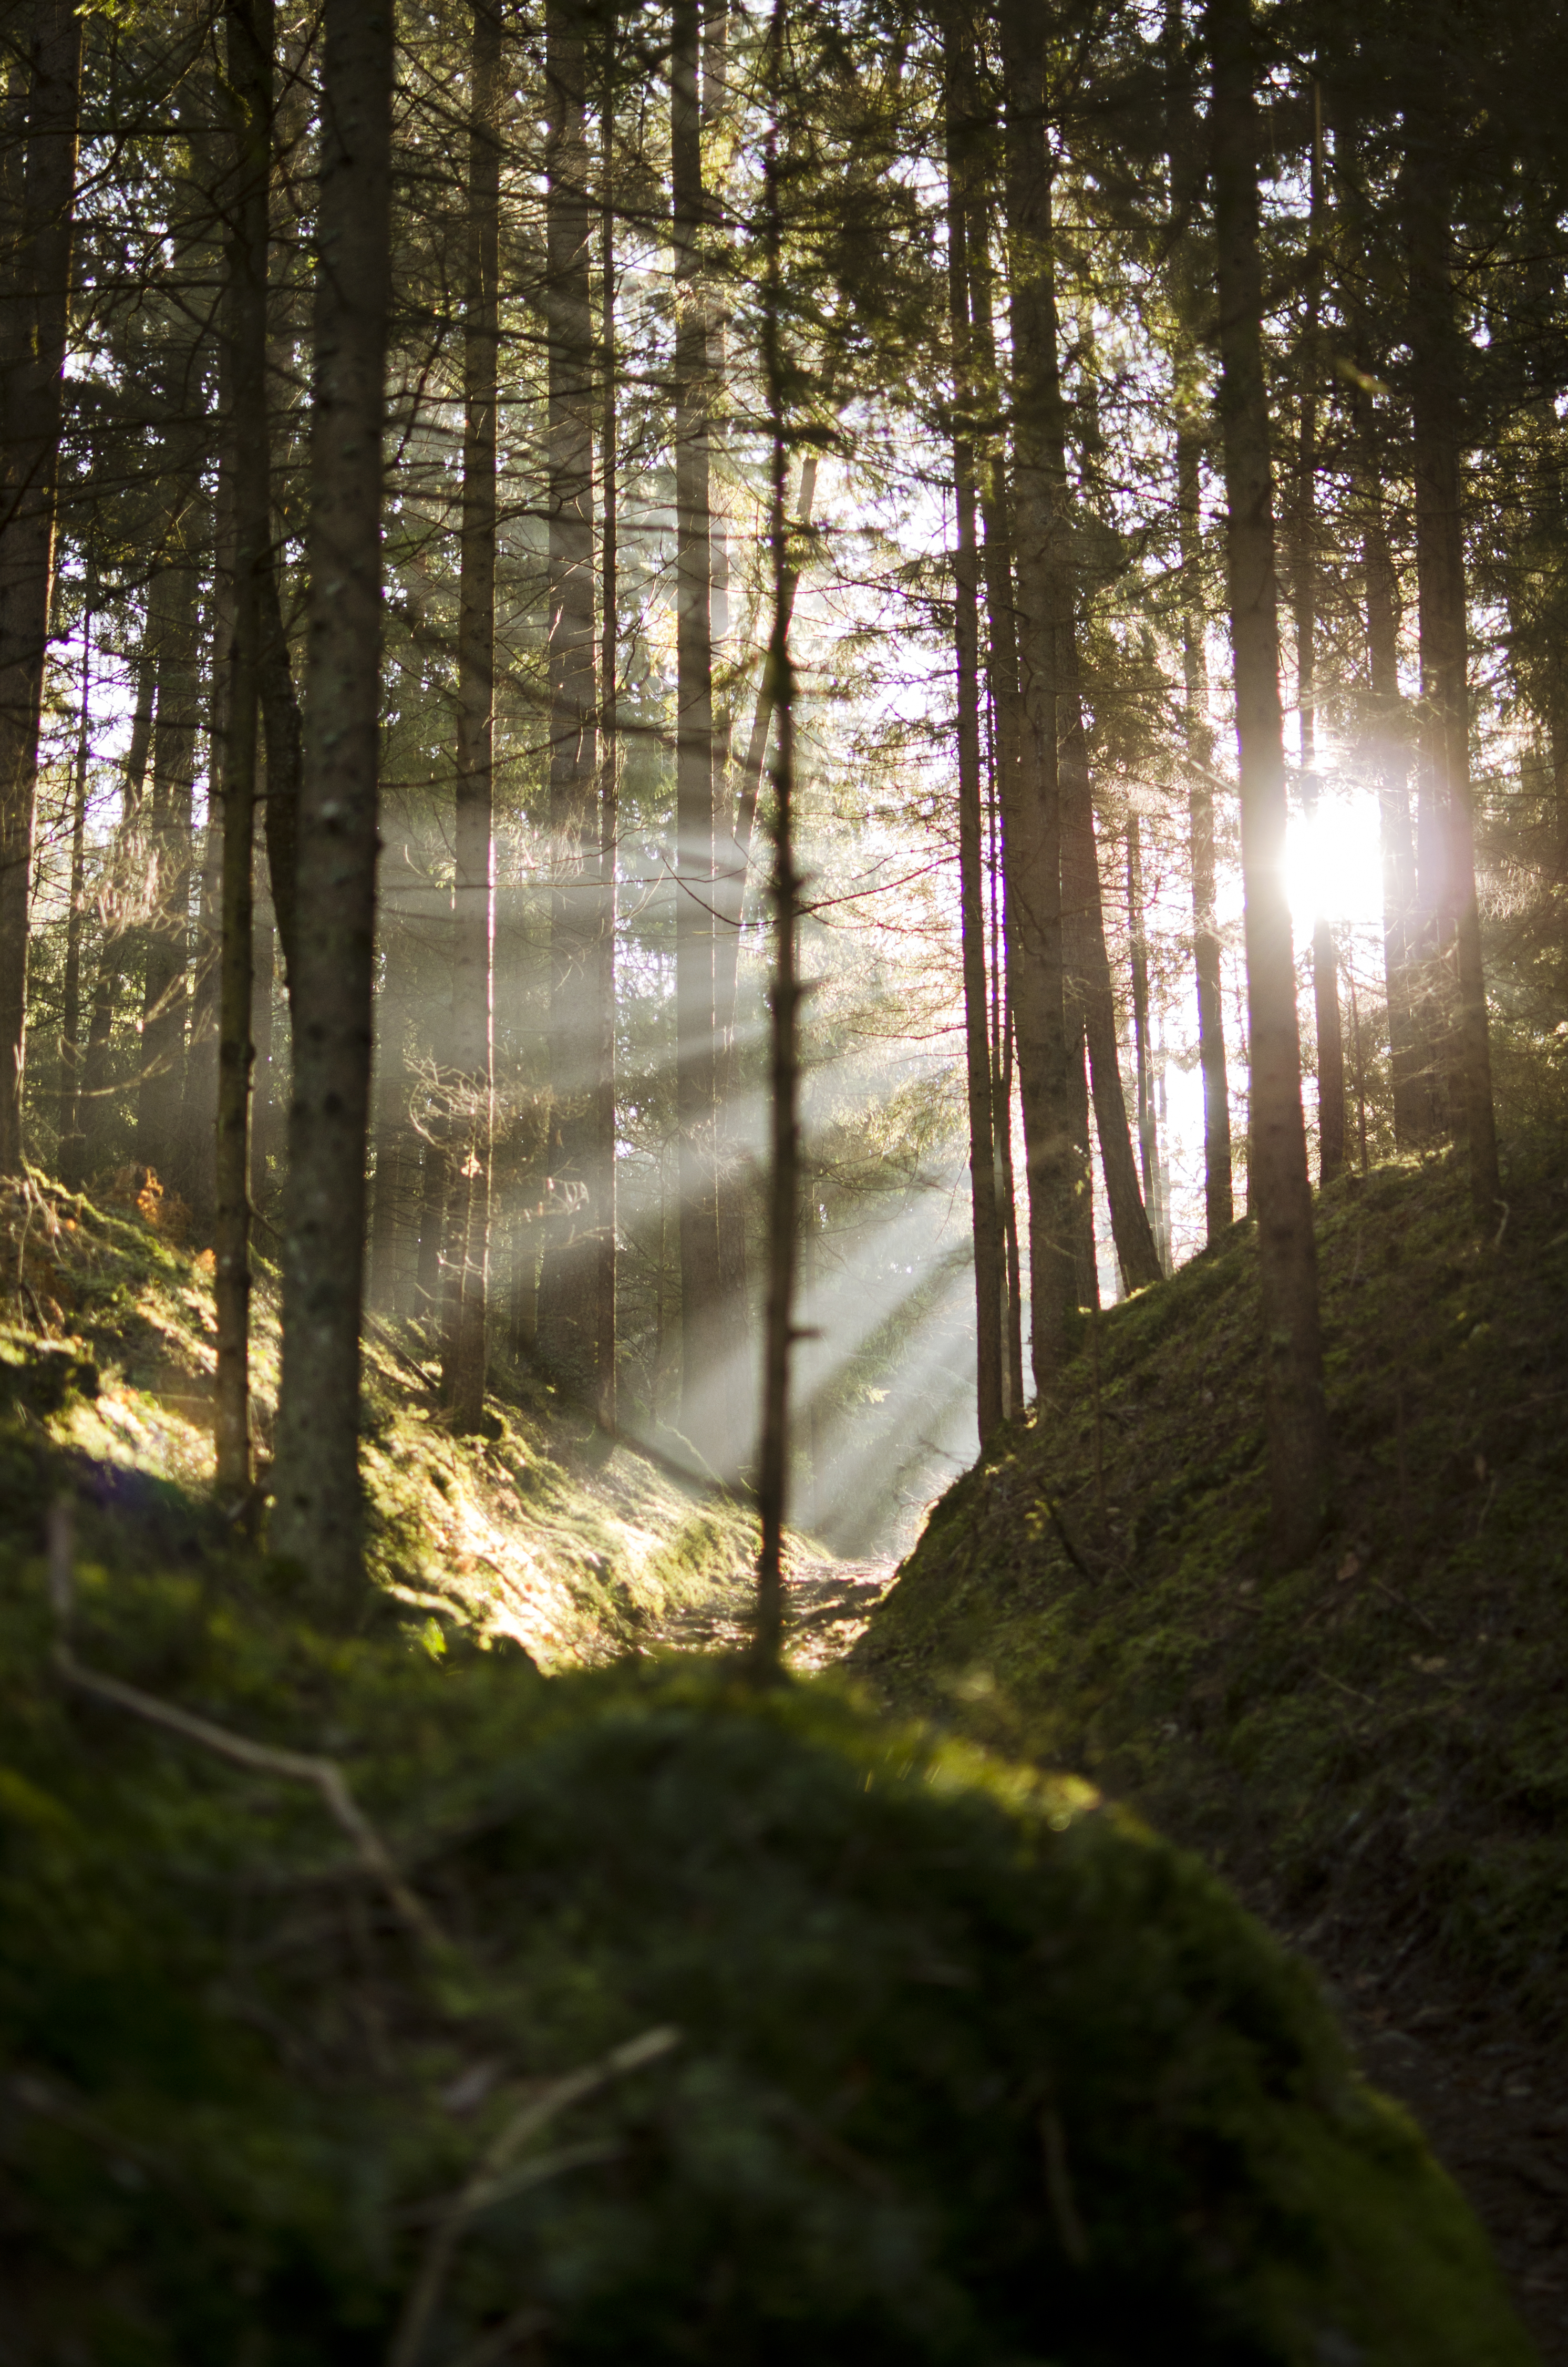 Wallpaper Full HD nature, trees, beams, rays, forest, branches